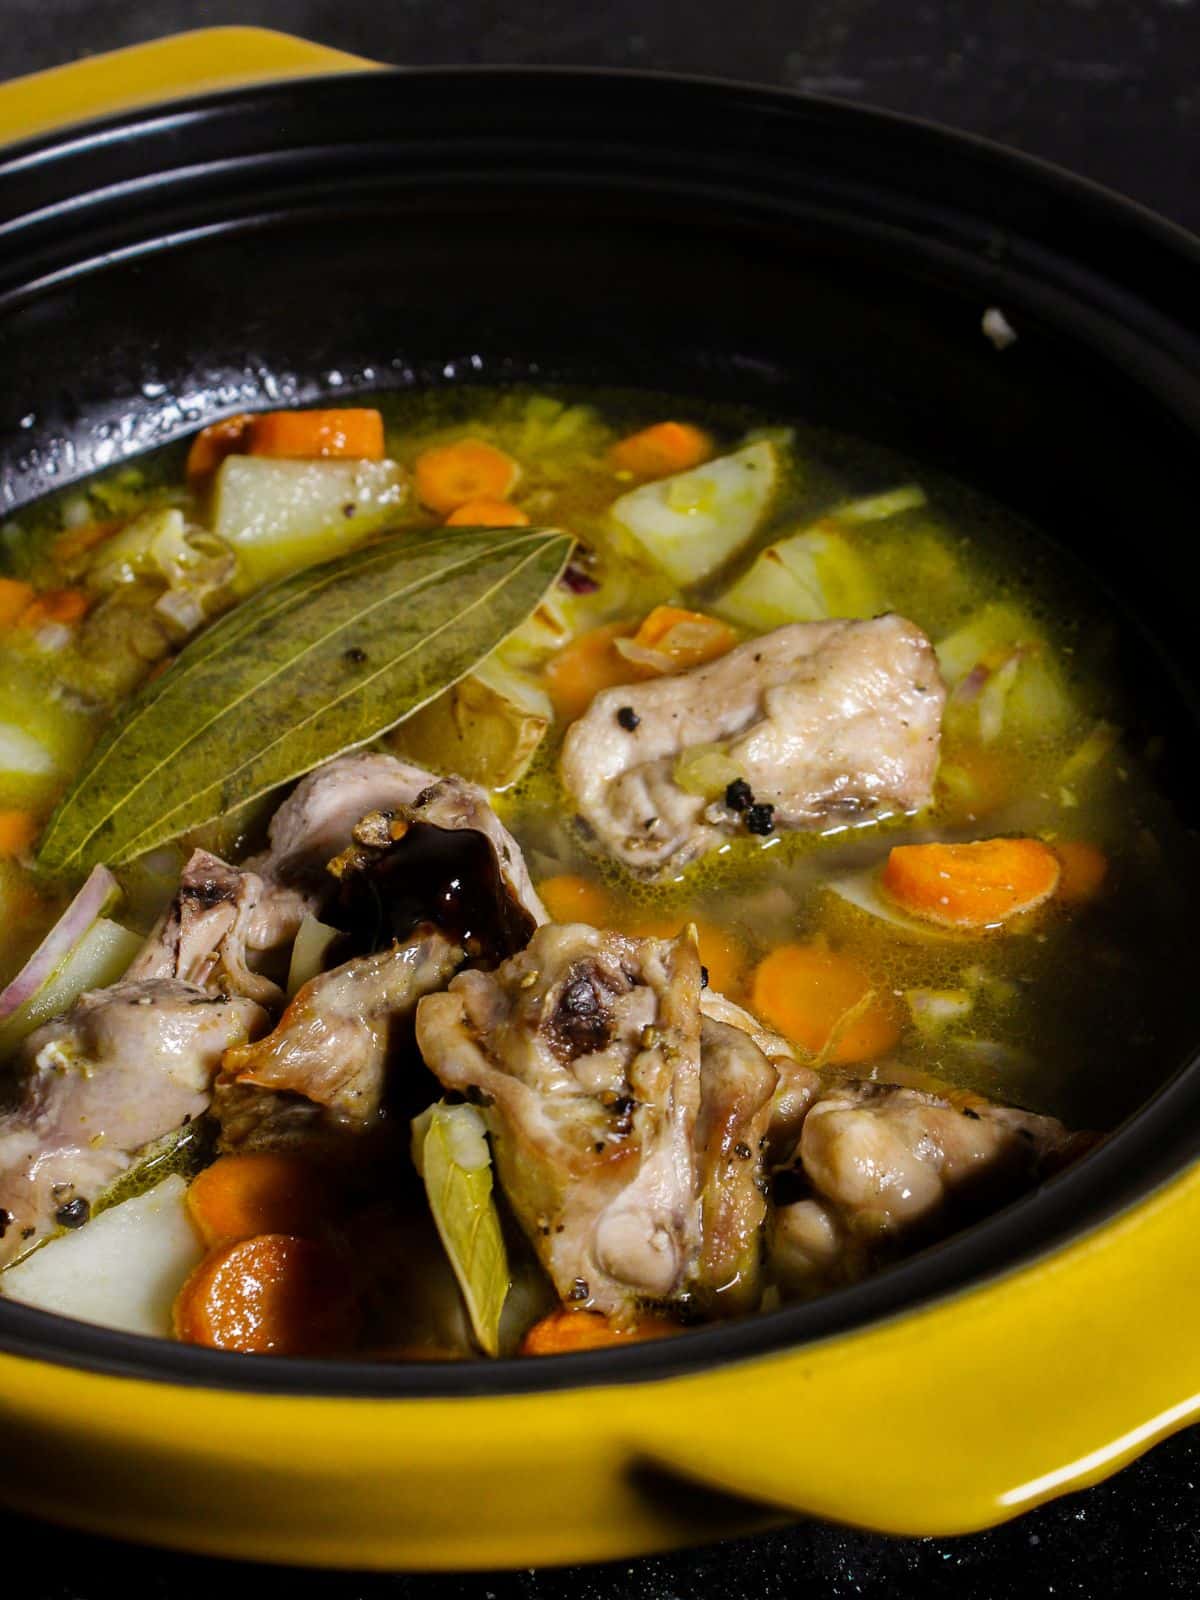 Add soya sauce, worcestershire sauce, and the calamansi juice into the pan and cook well